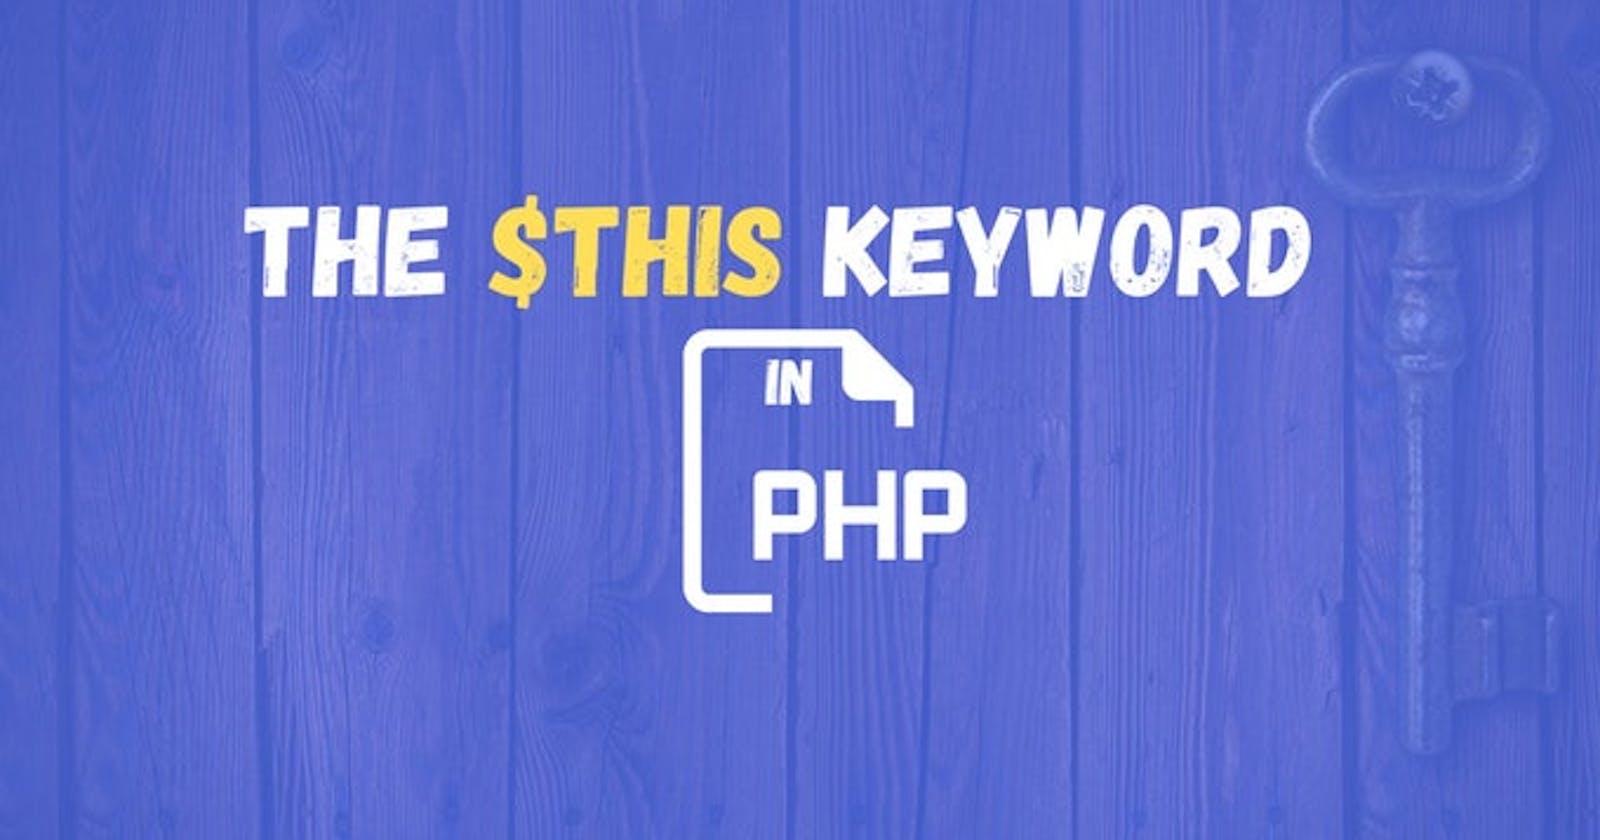 What is the $this keyword and how to use it in PHP